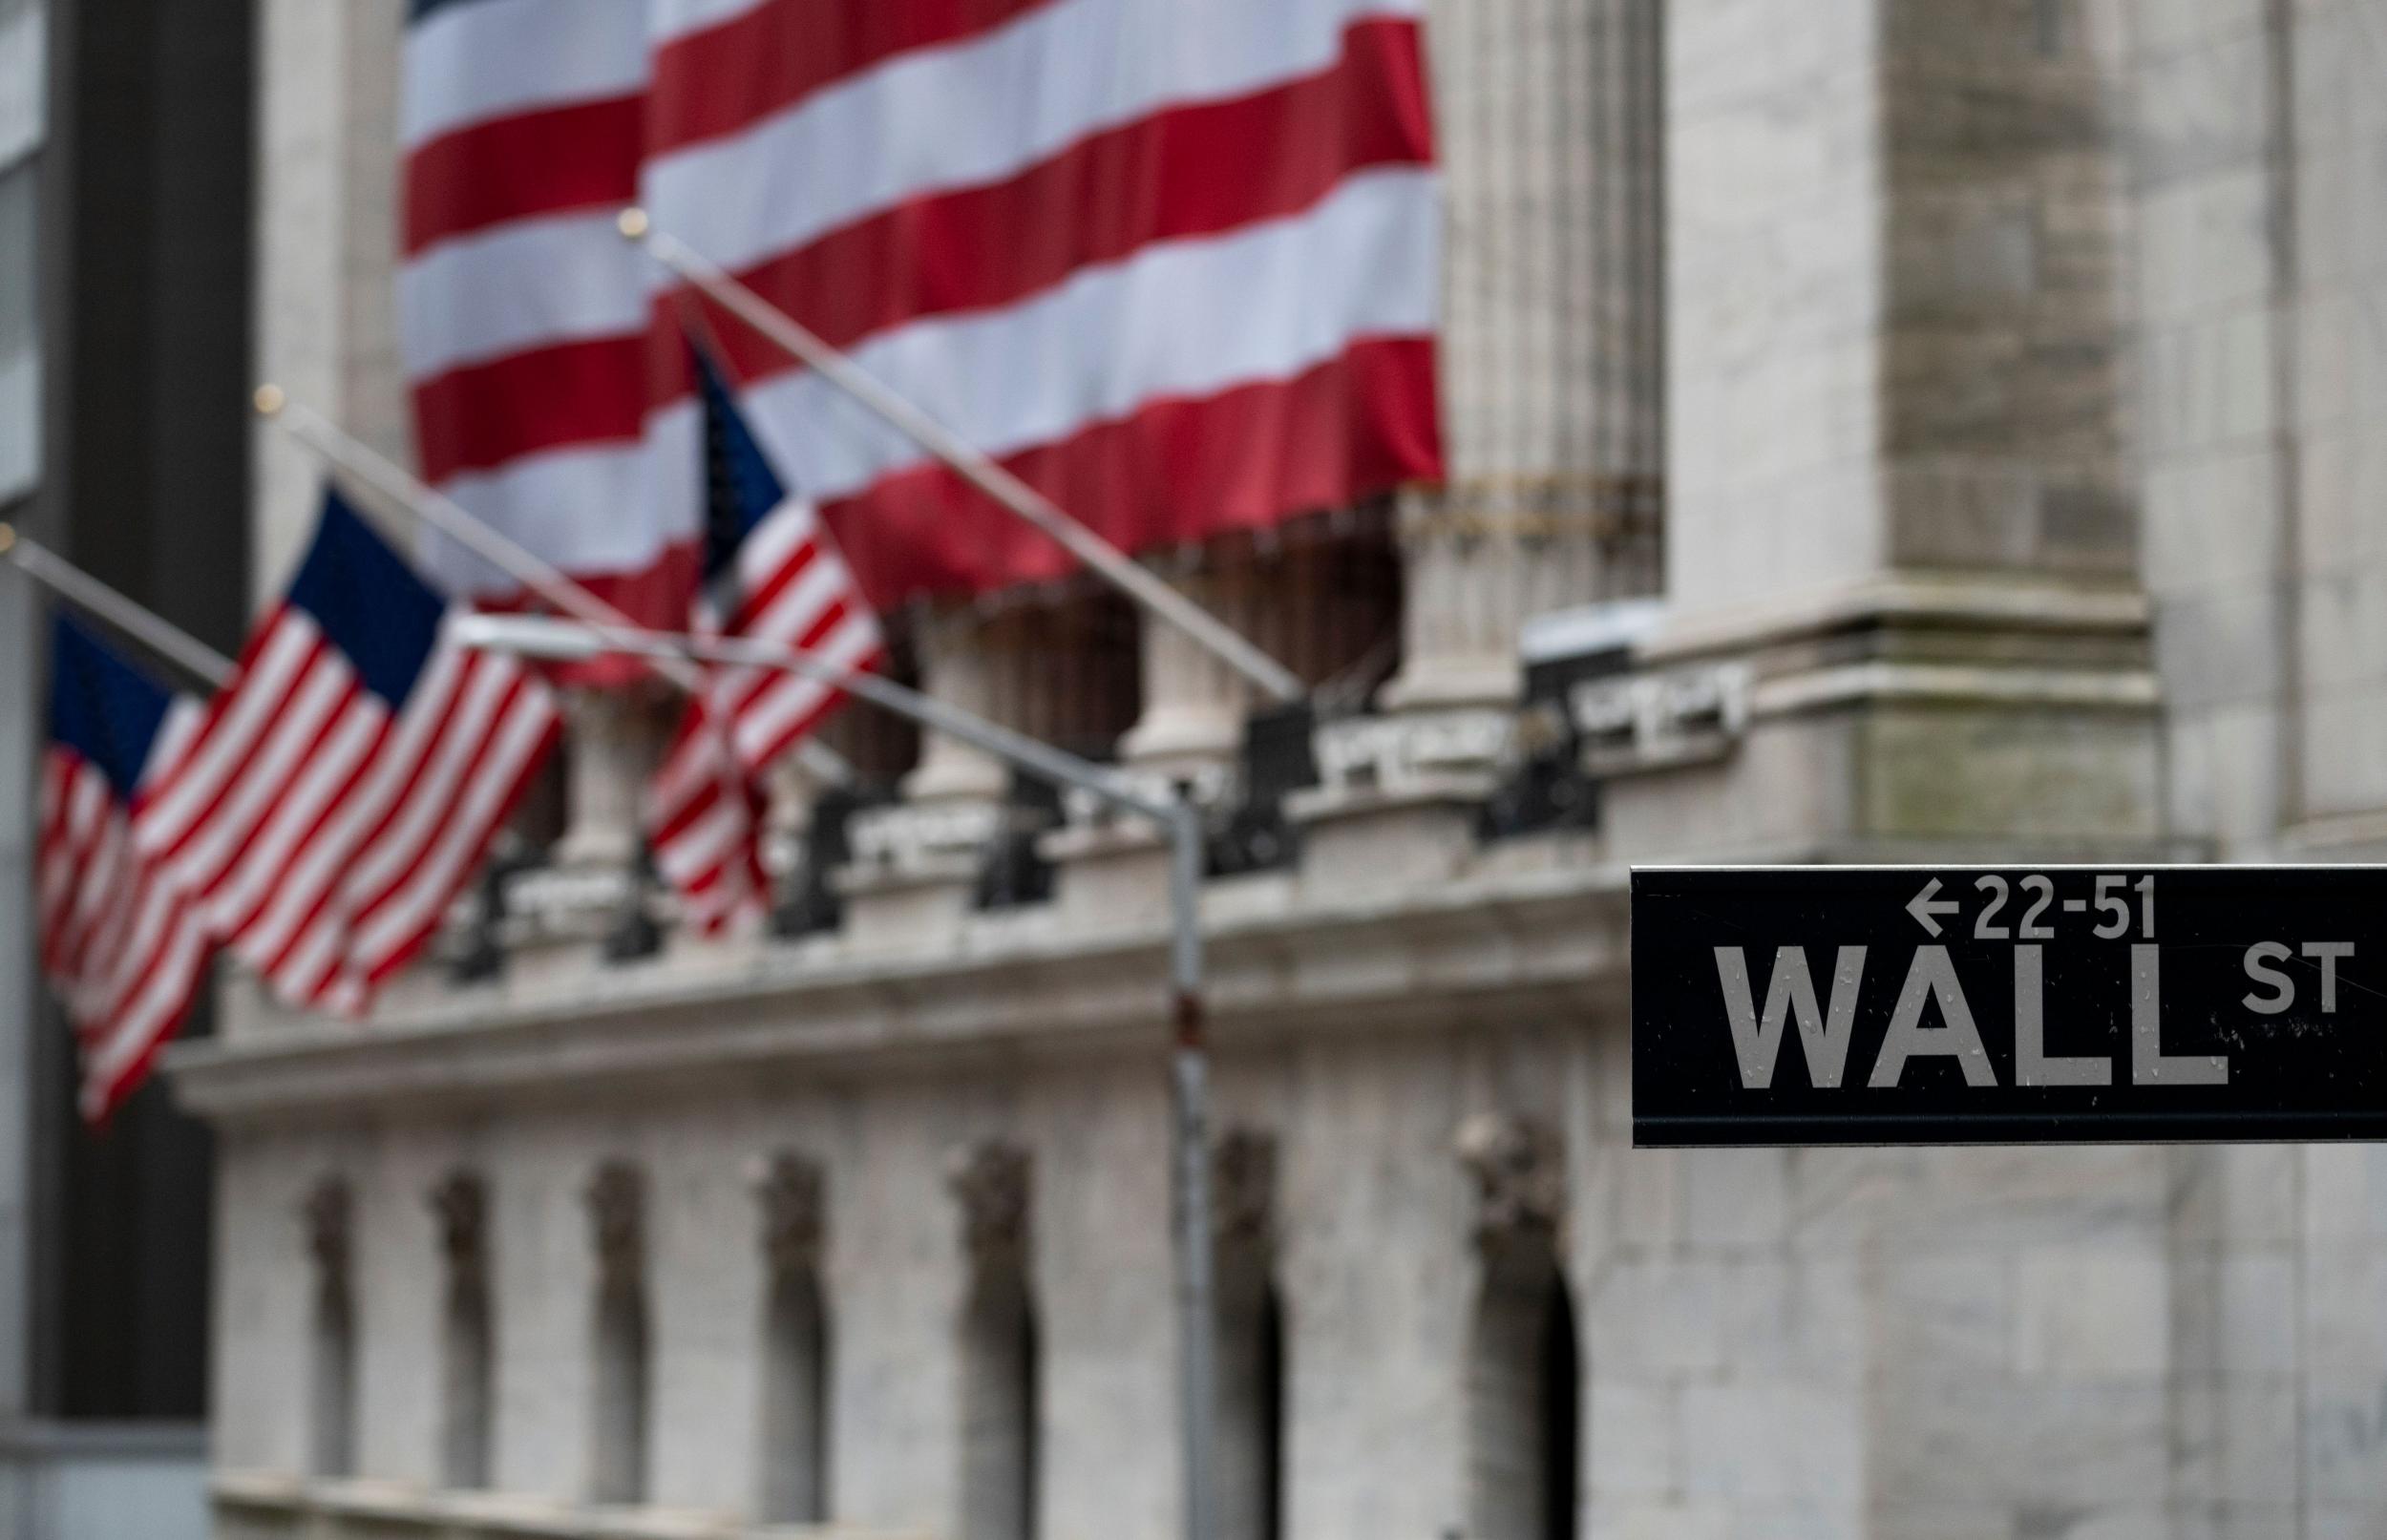 All is not well on Wall Street